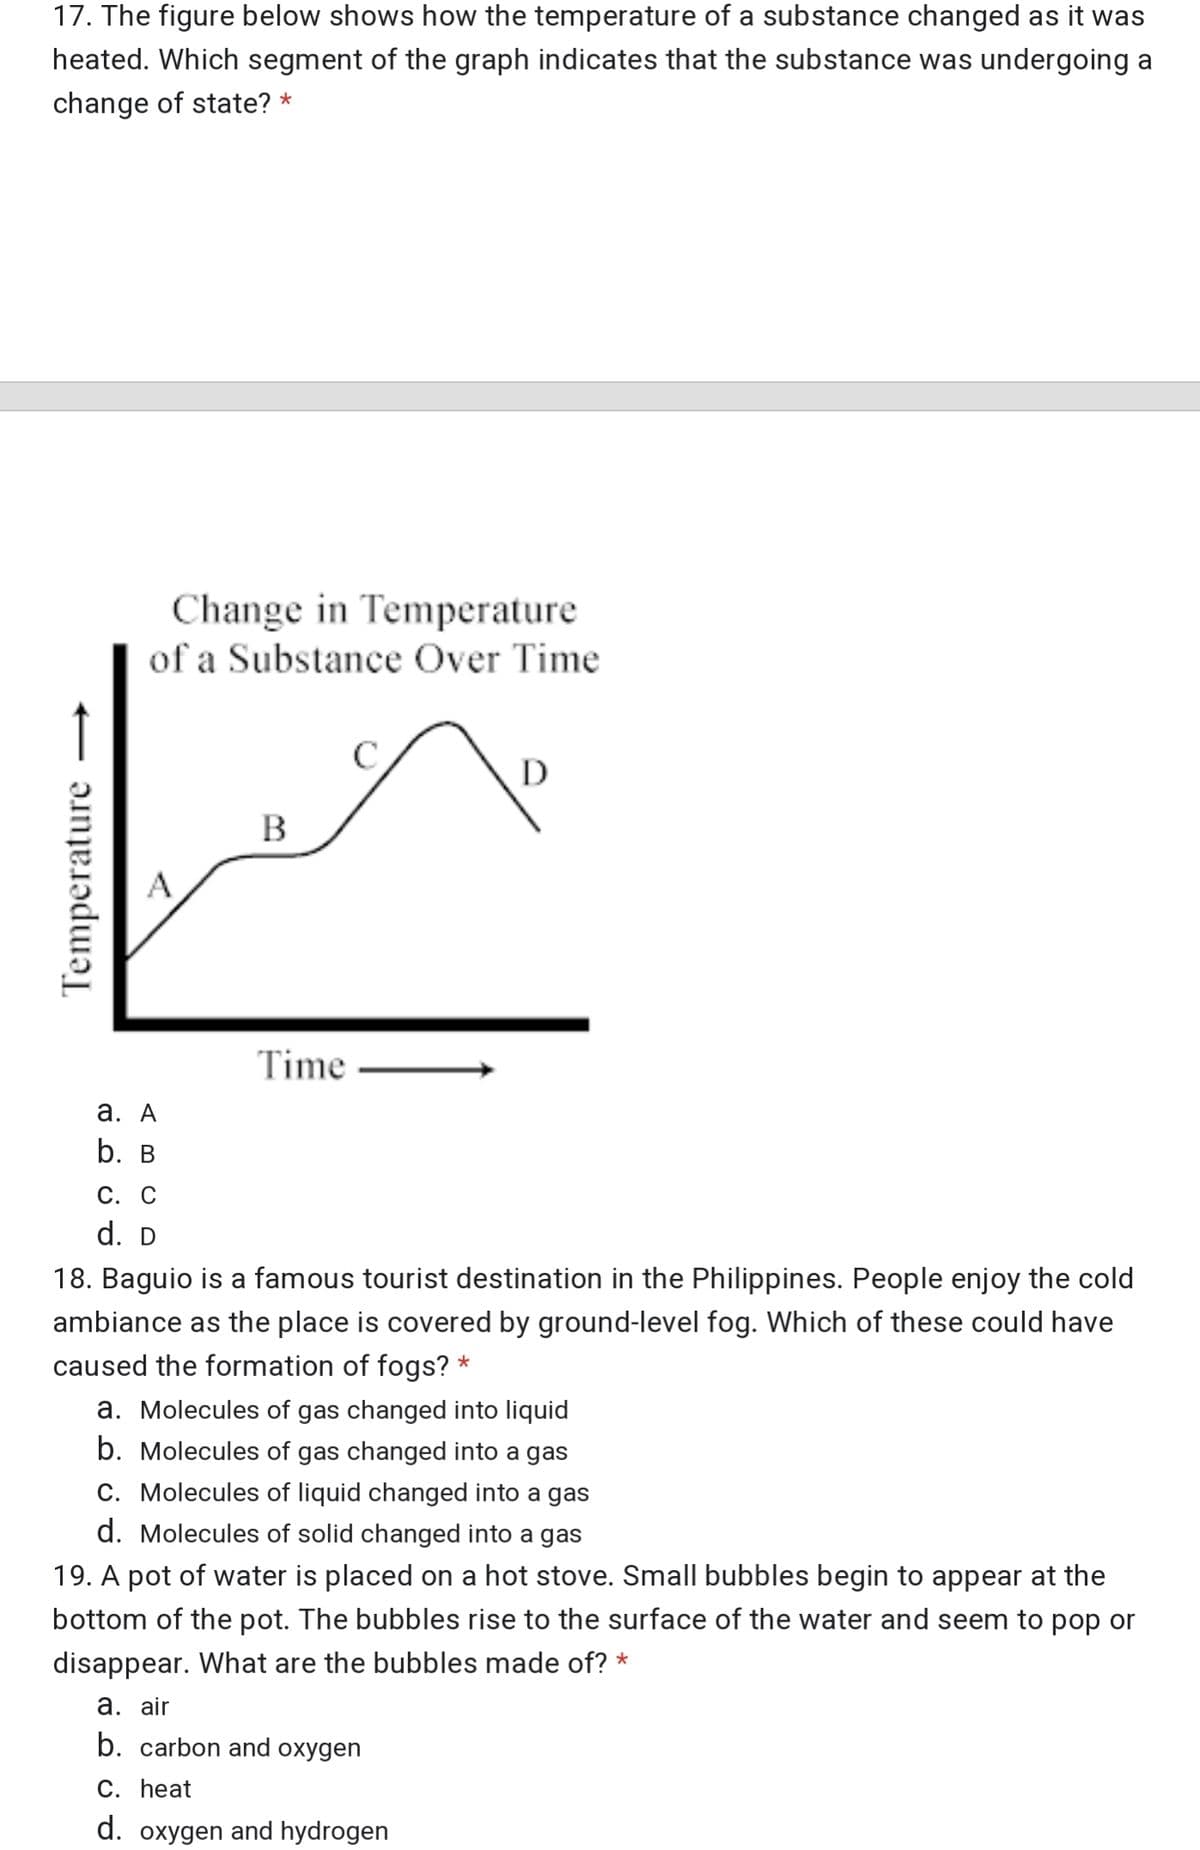 17. The figure below shows how the temperature of a substance changed as it was
heated. Which segment of the graph indicates that the substance was undergoing a
change of state? *
Change in Temperature
of a Substance Over Time
В
Time
а. А
b. в
С. С
d. D
18. Baguio is a famous tourist destination in the Philippines. People enjoy the cold
ambiance as the place is covered by ground-level fog. Which of these could have
caused the formation of fogs? *
a. Molecules of gas changed into liquid
b. Molecules of gas changed into a gas
C. Molecules of liquid changed into a gas
d. Molecules of solid changed into a gas
19. A pot of water is placed on a hot stove. Small bubbles begin to appear at the
bottom of the pot. The bubbles rise to the surface of the water and seem to pop or
disappear. What are the bubbles made of? *
а. air
b. carbon and oxygen
С. Һeat
d. oxygen and hydrogen
Temperature
